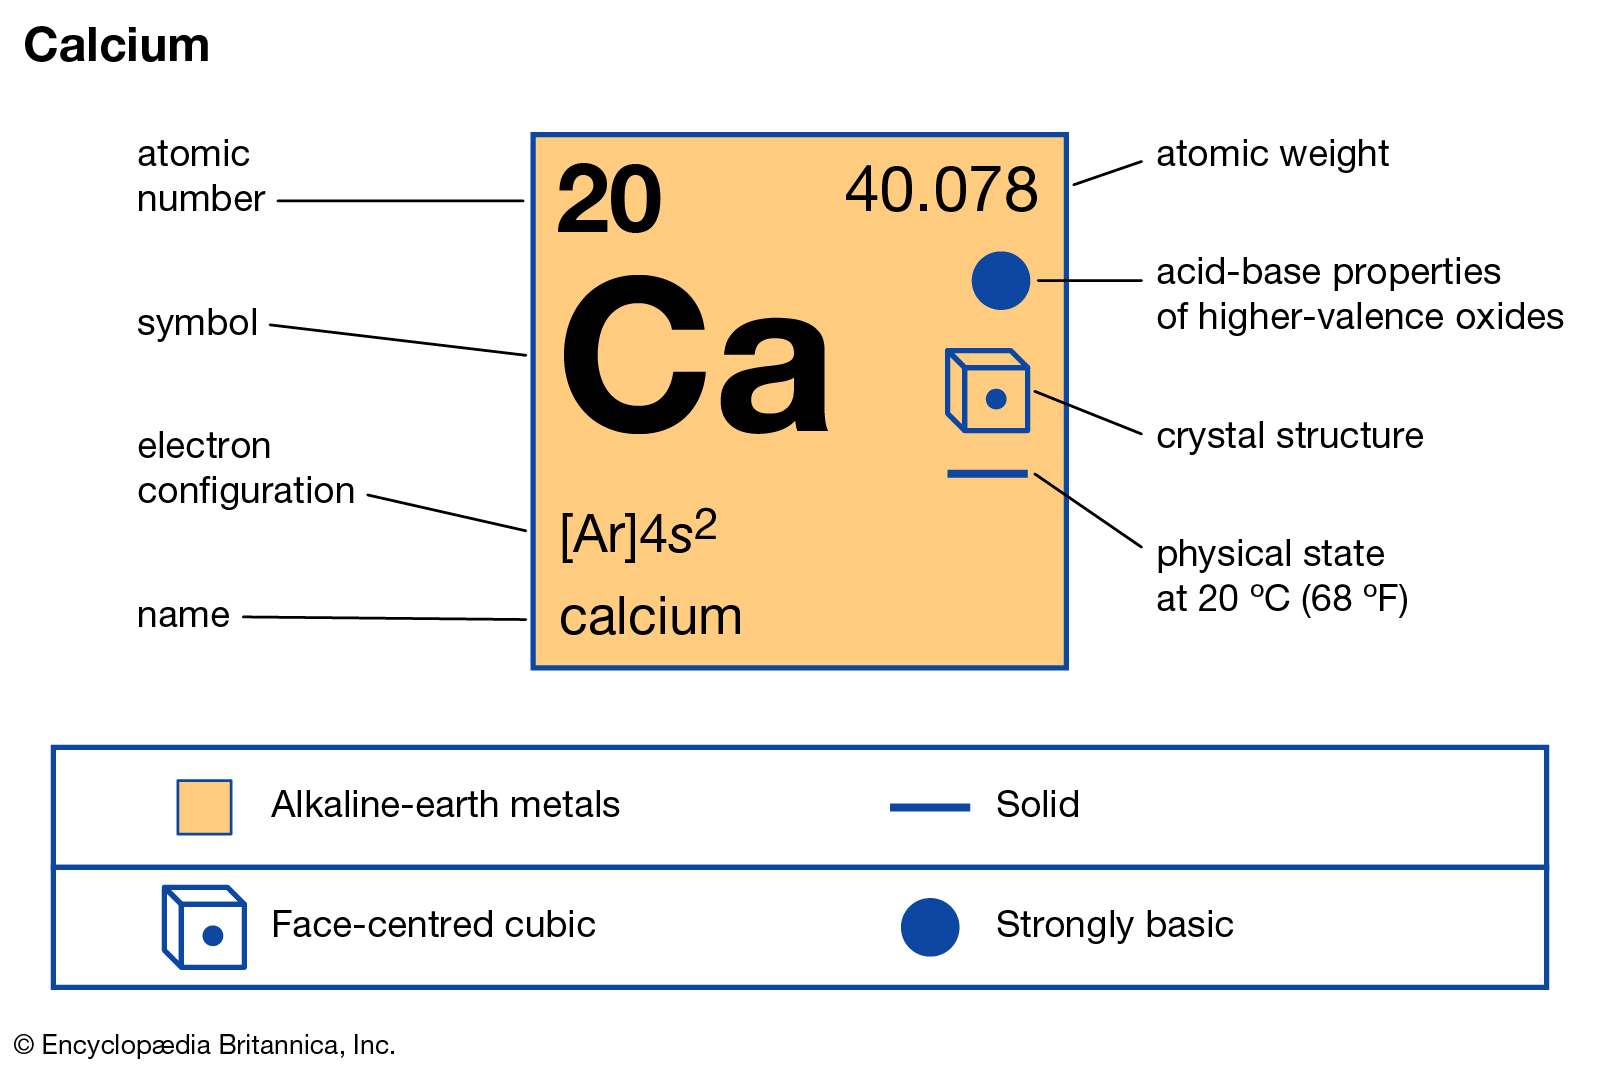 hinh-anh-interesting-facts-about-calcium-42-0